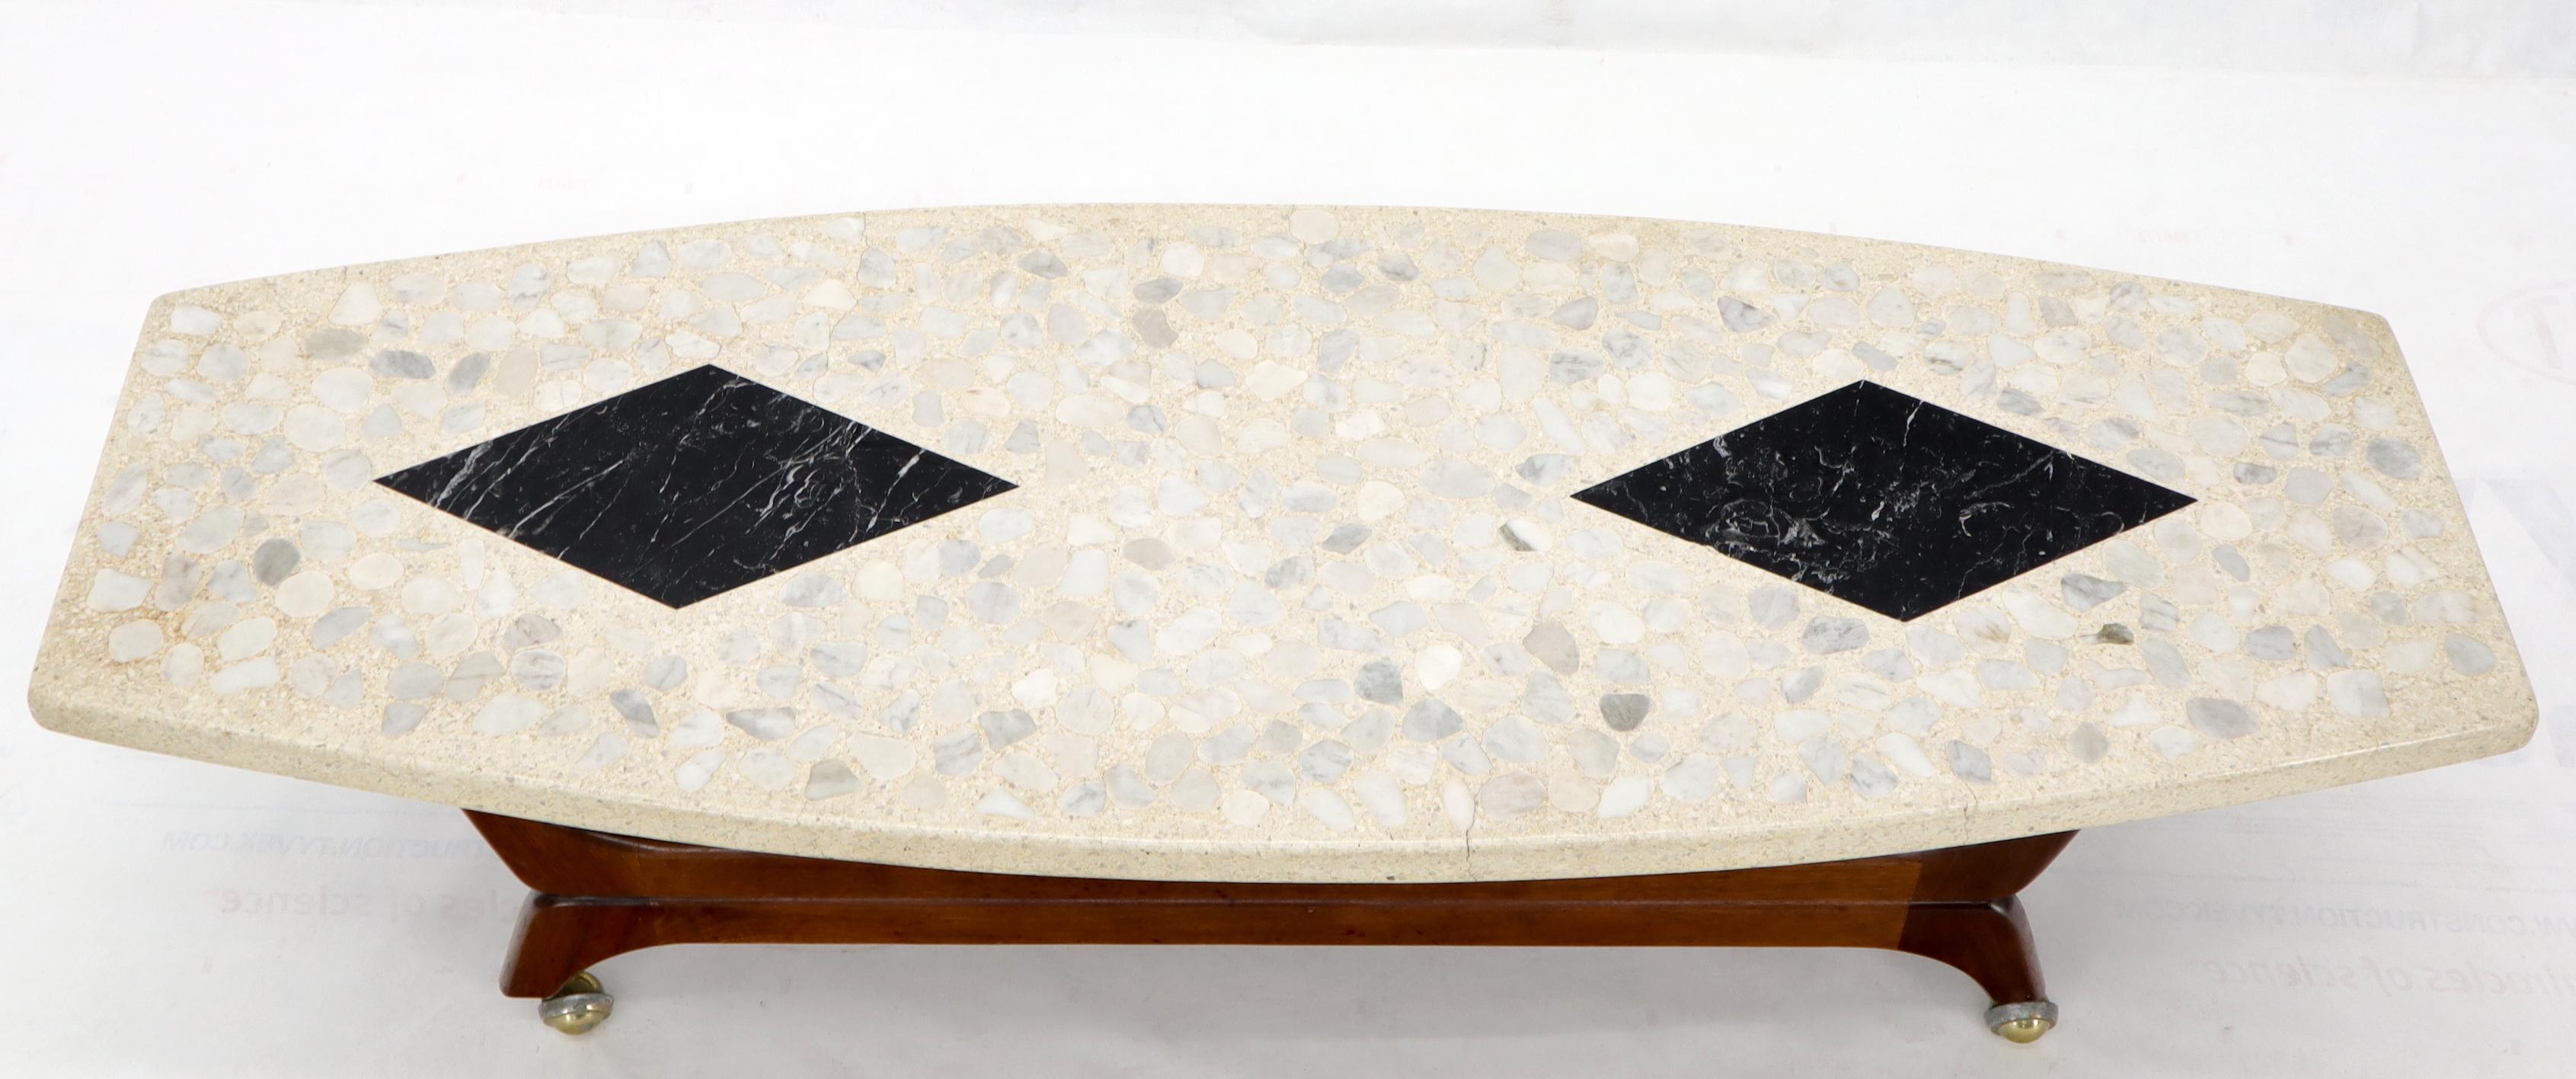 20th Century Terrazzo Stone Inlay Boat Shape Oiled Walnut Base Coffee Table For Sale